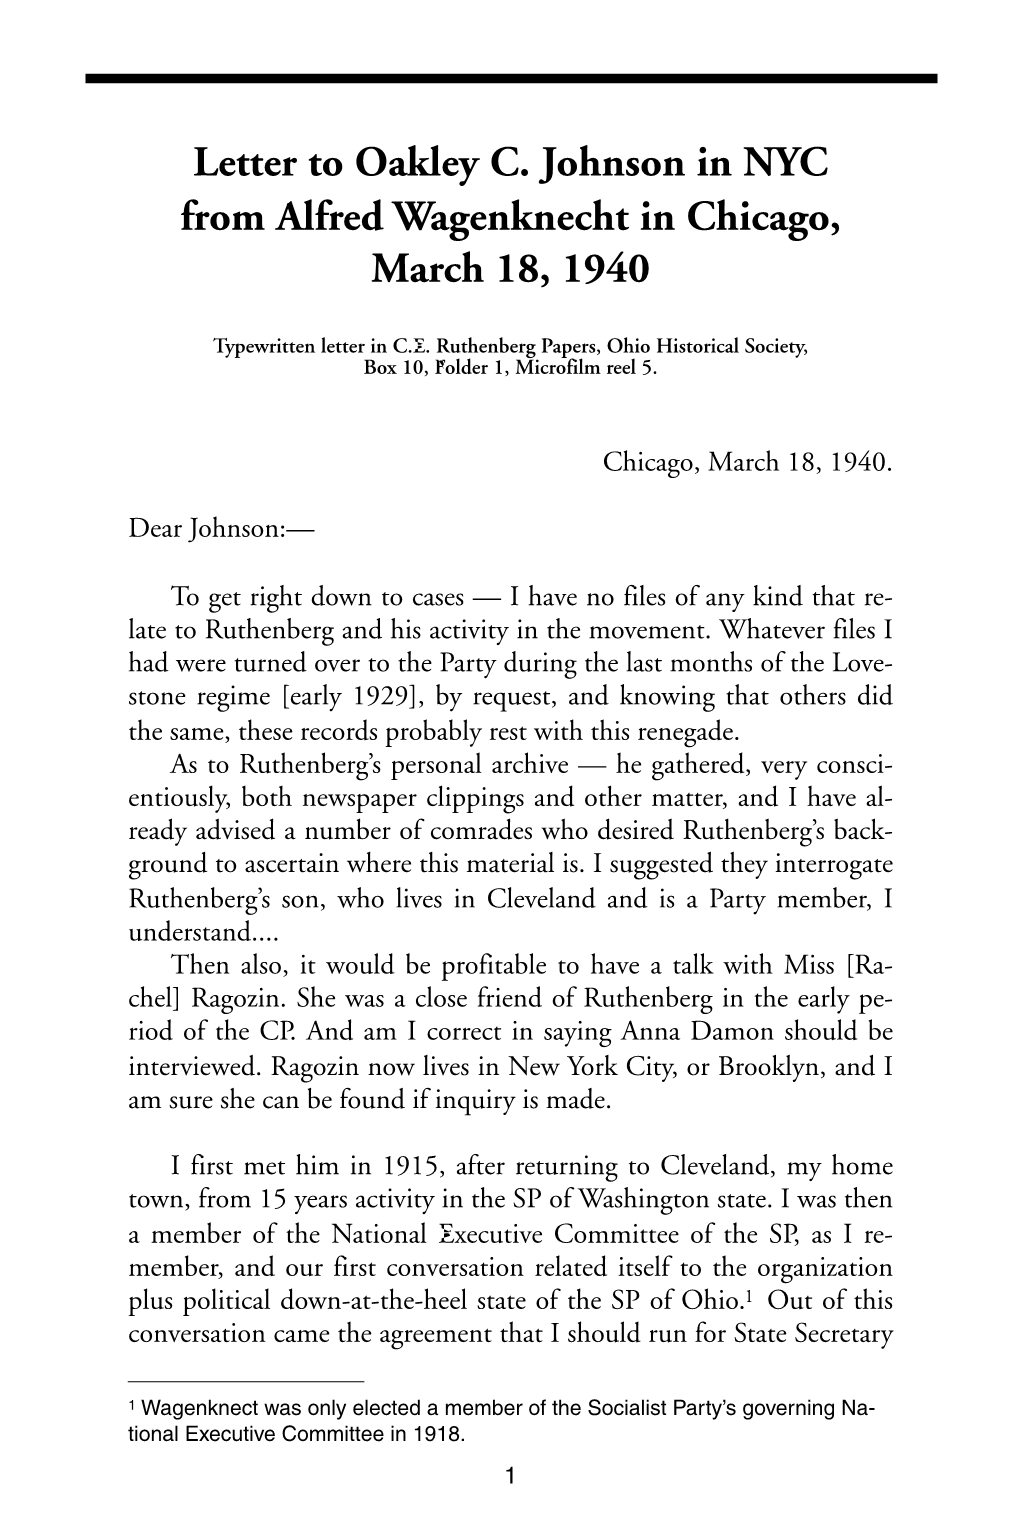 Letter to Oakley C. Johnson in NYC from Alfred Wagenknecht in Chicago, March 18, 1940